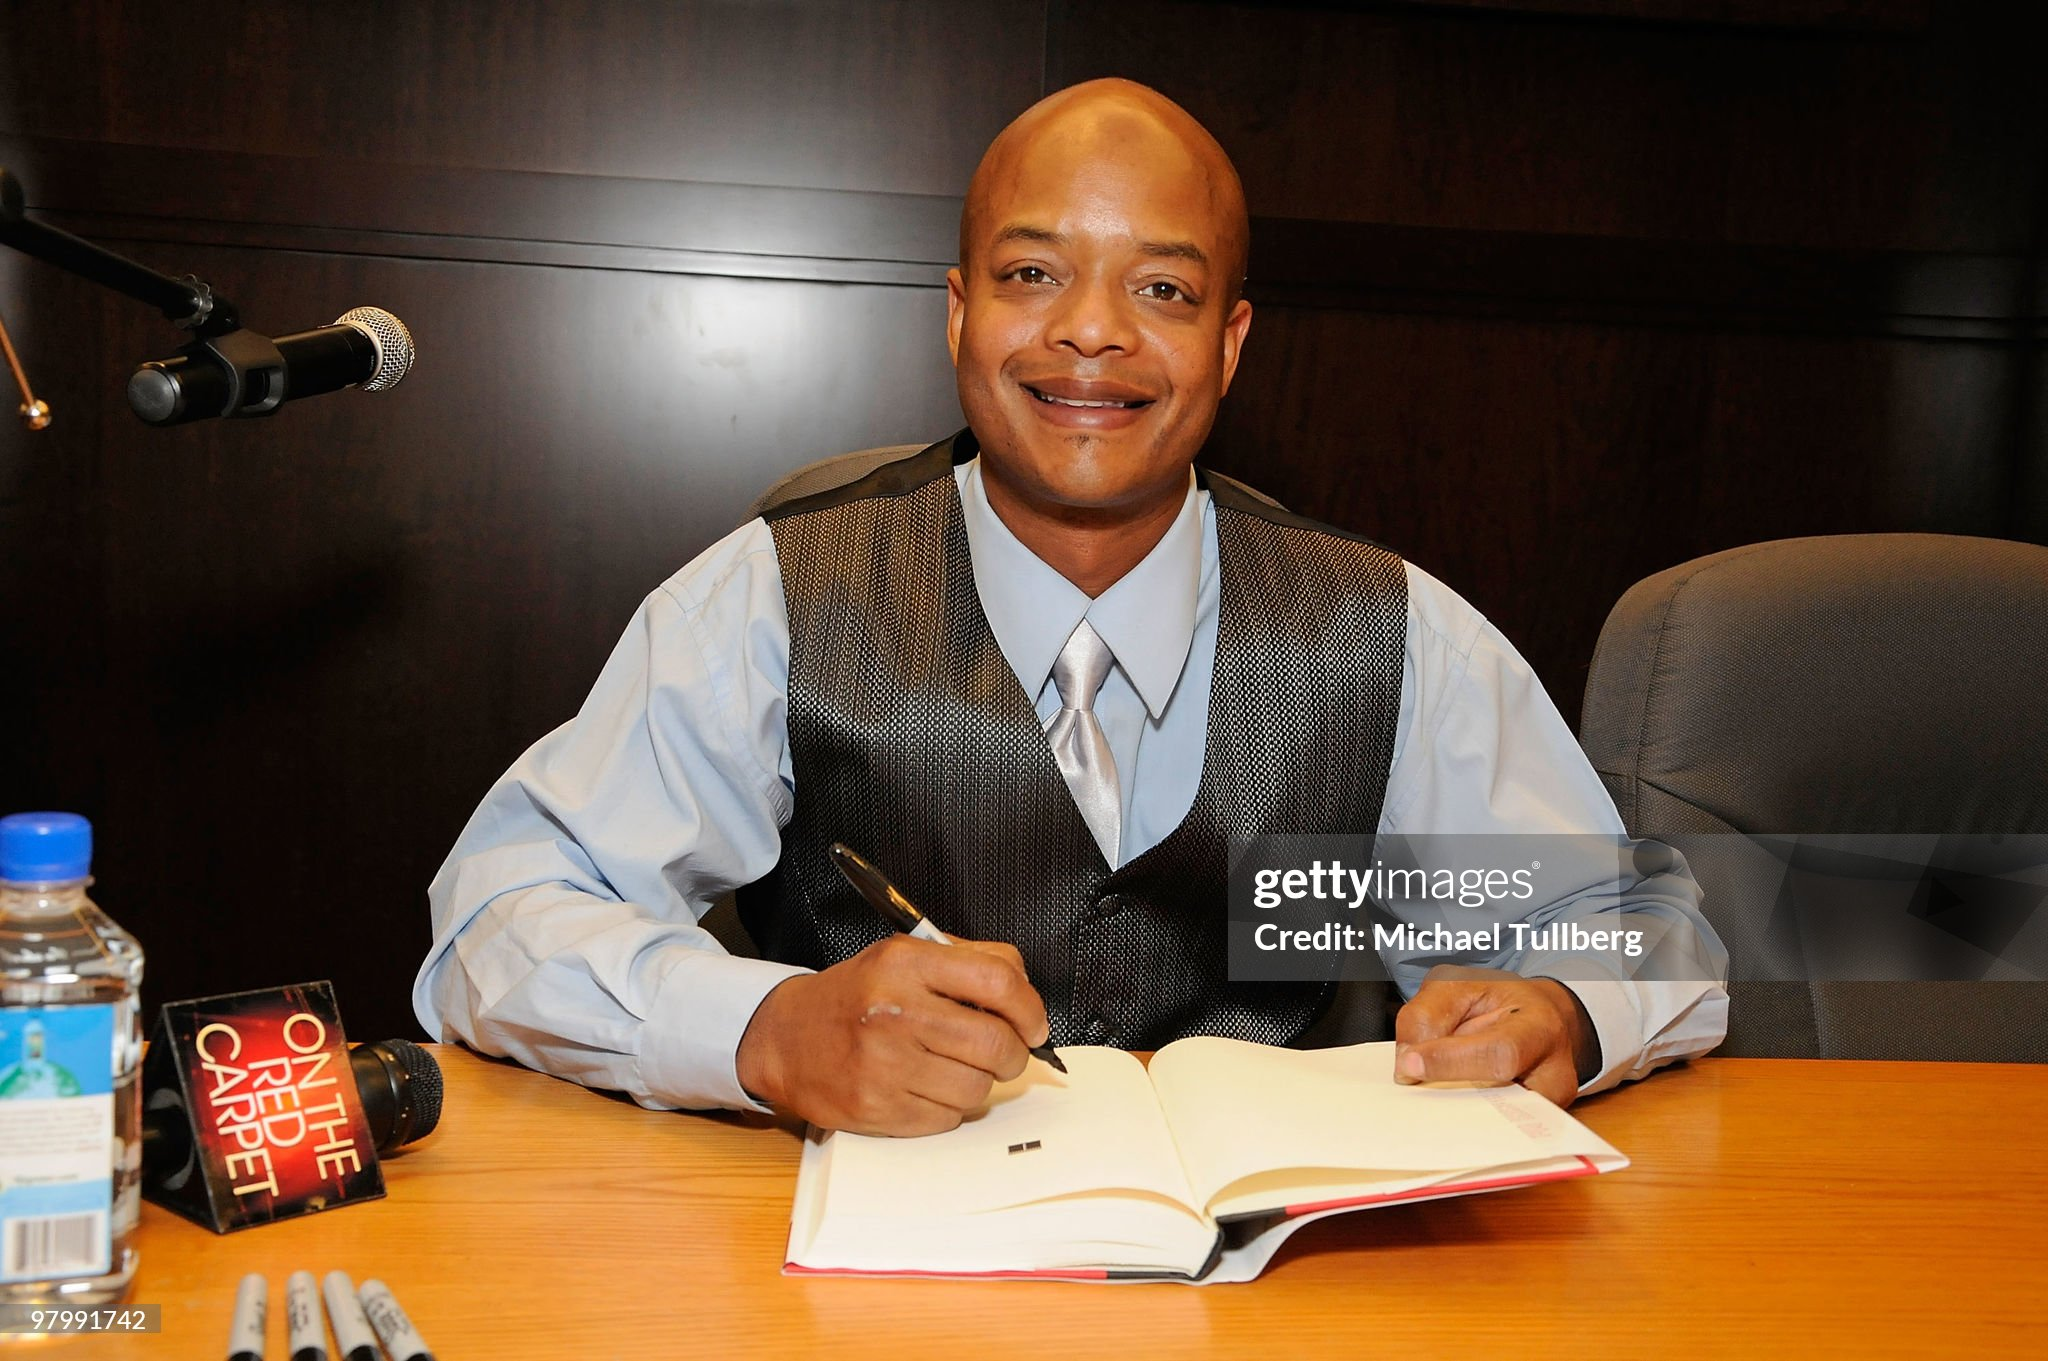 Todd Bridges poses with a copy of his book "Killing Willis" 